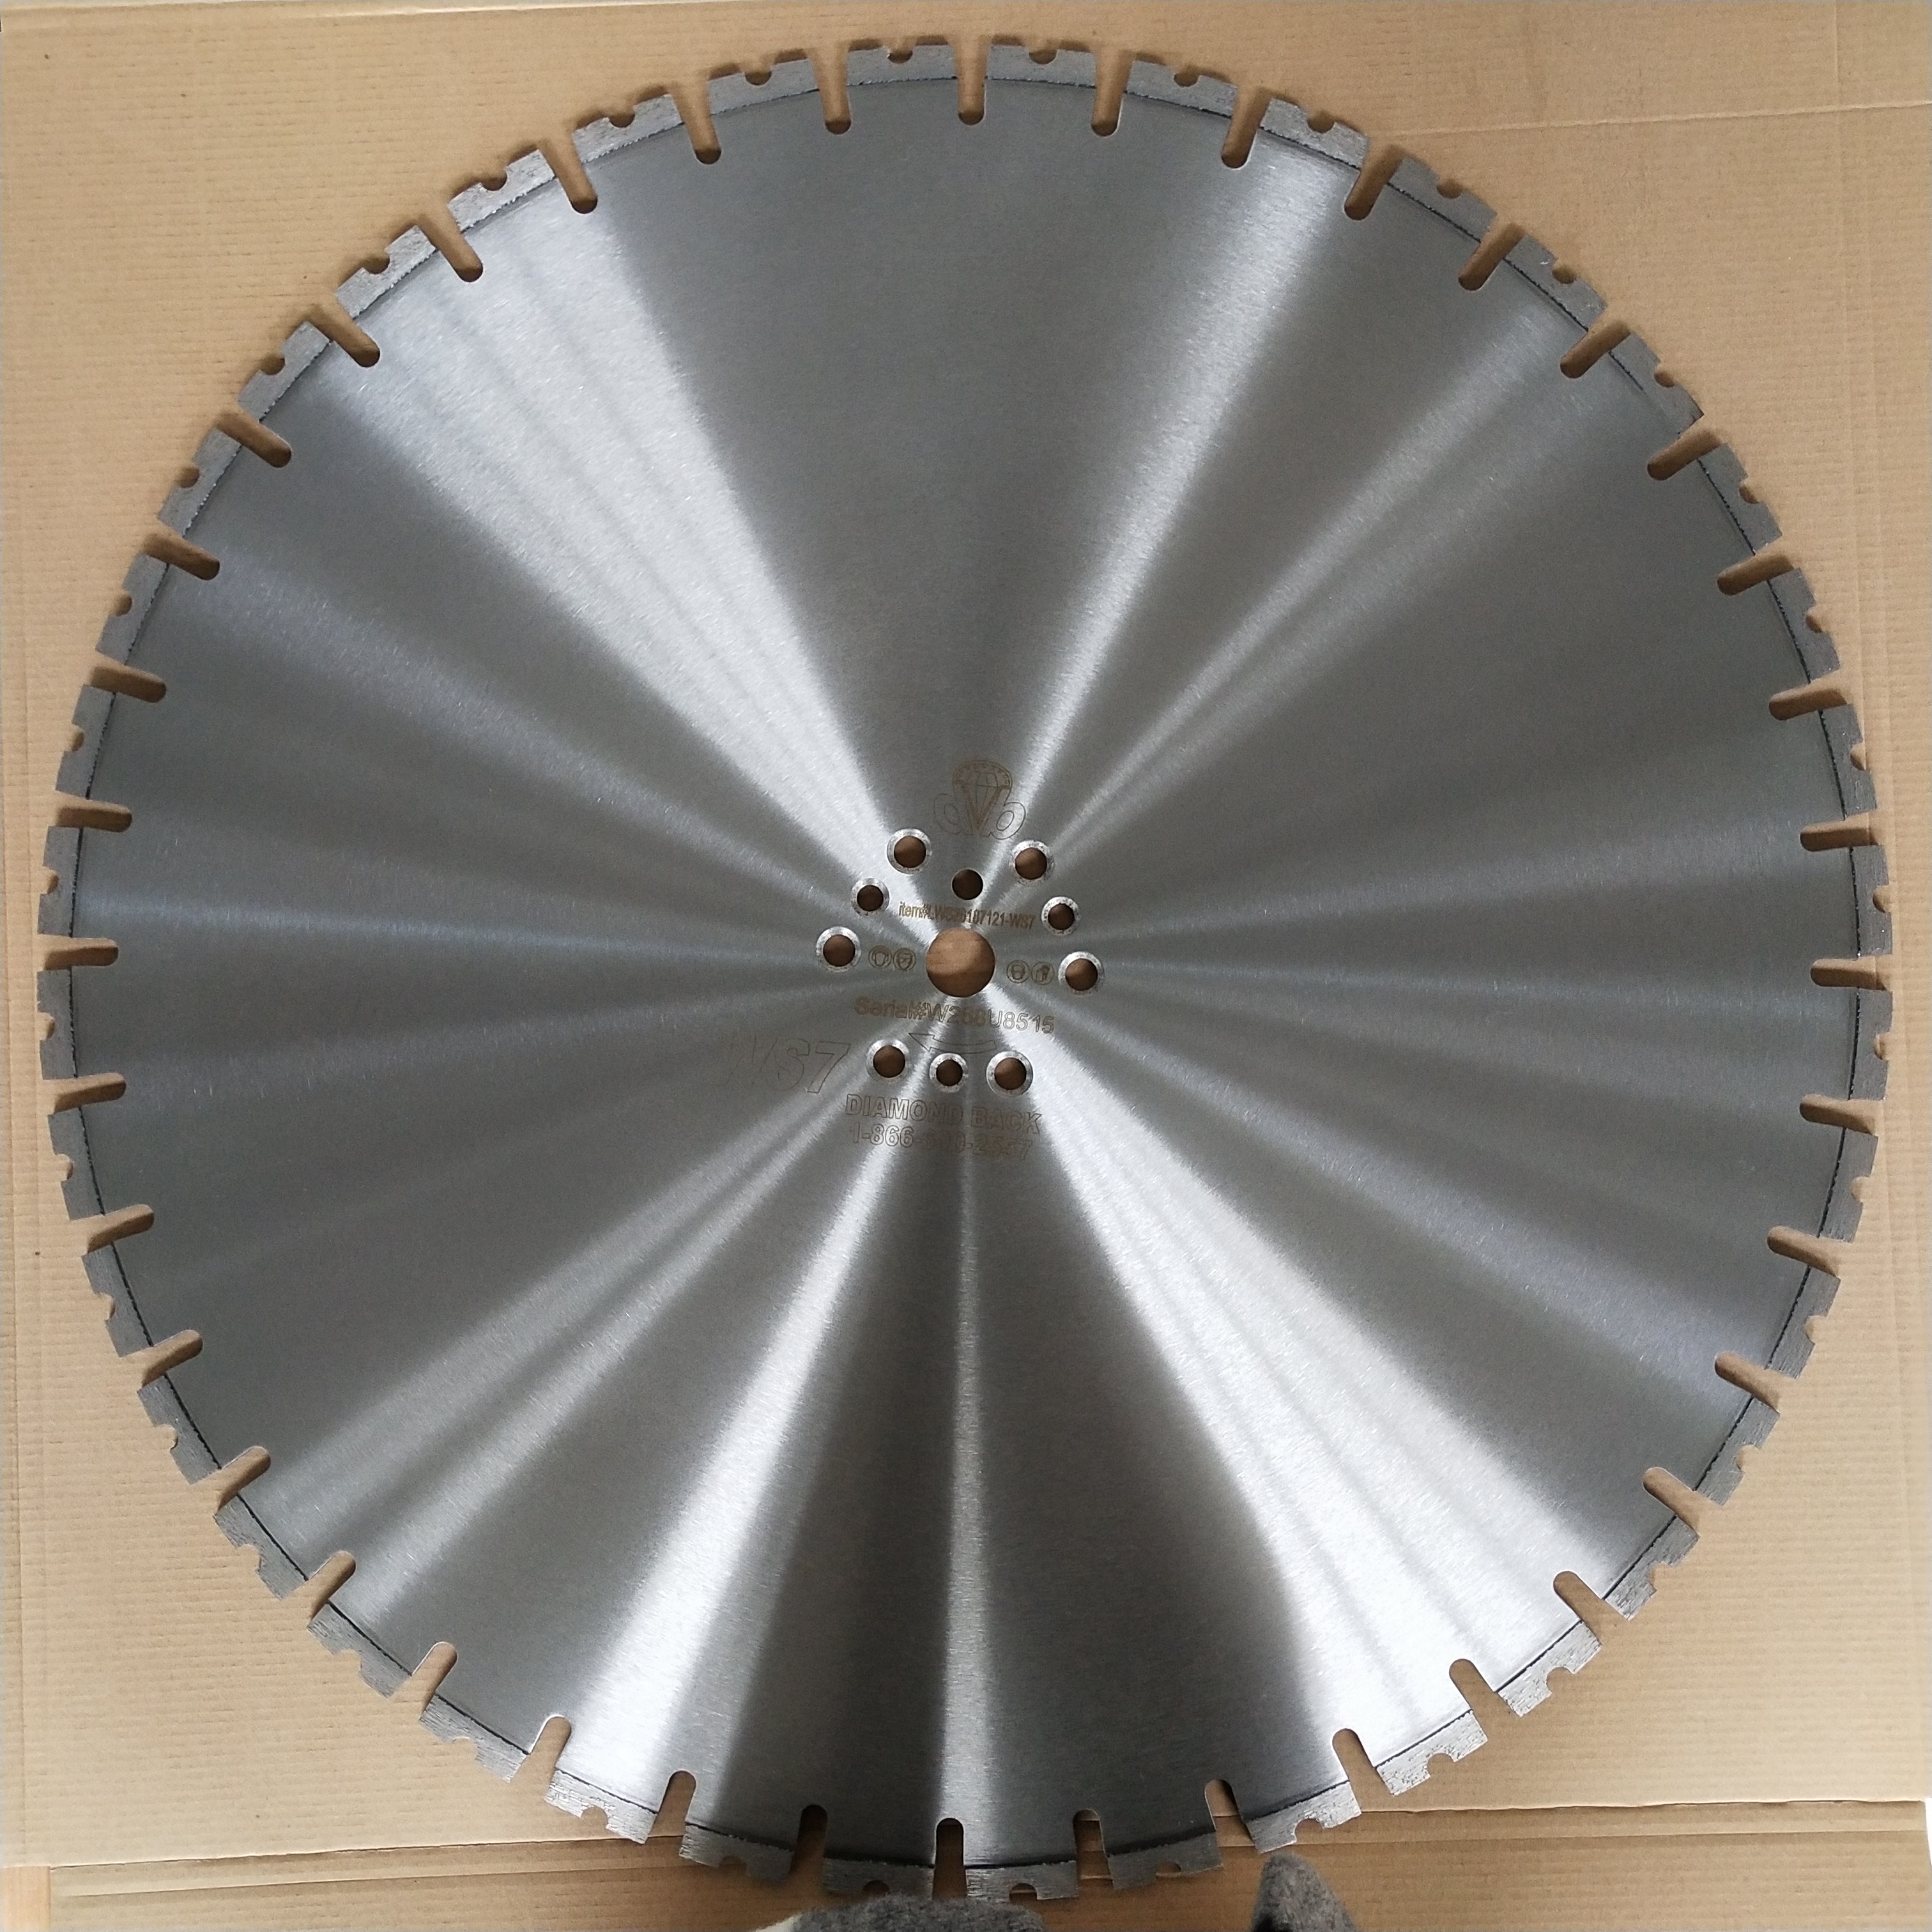 650mm Laser Welded Diamond Saw Blade Concrete Cutting Blade for Wall Saw